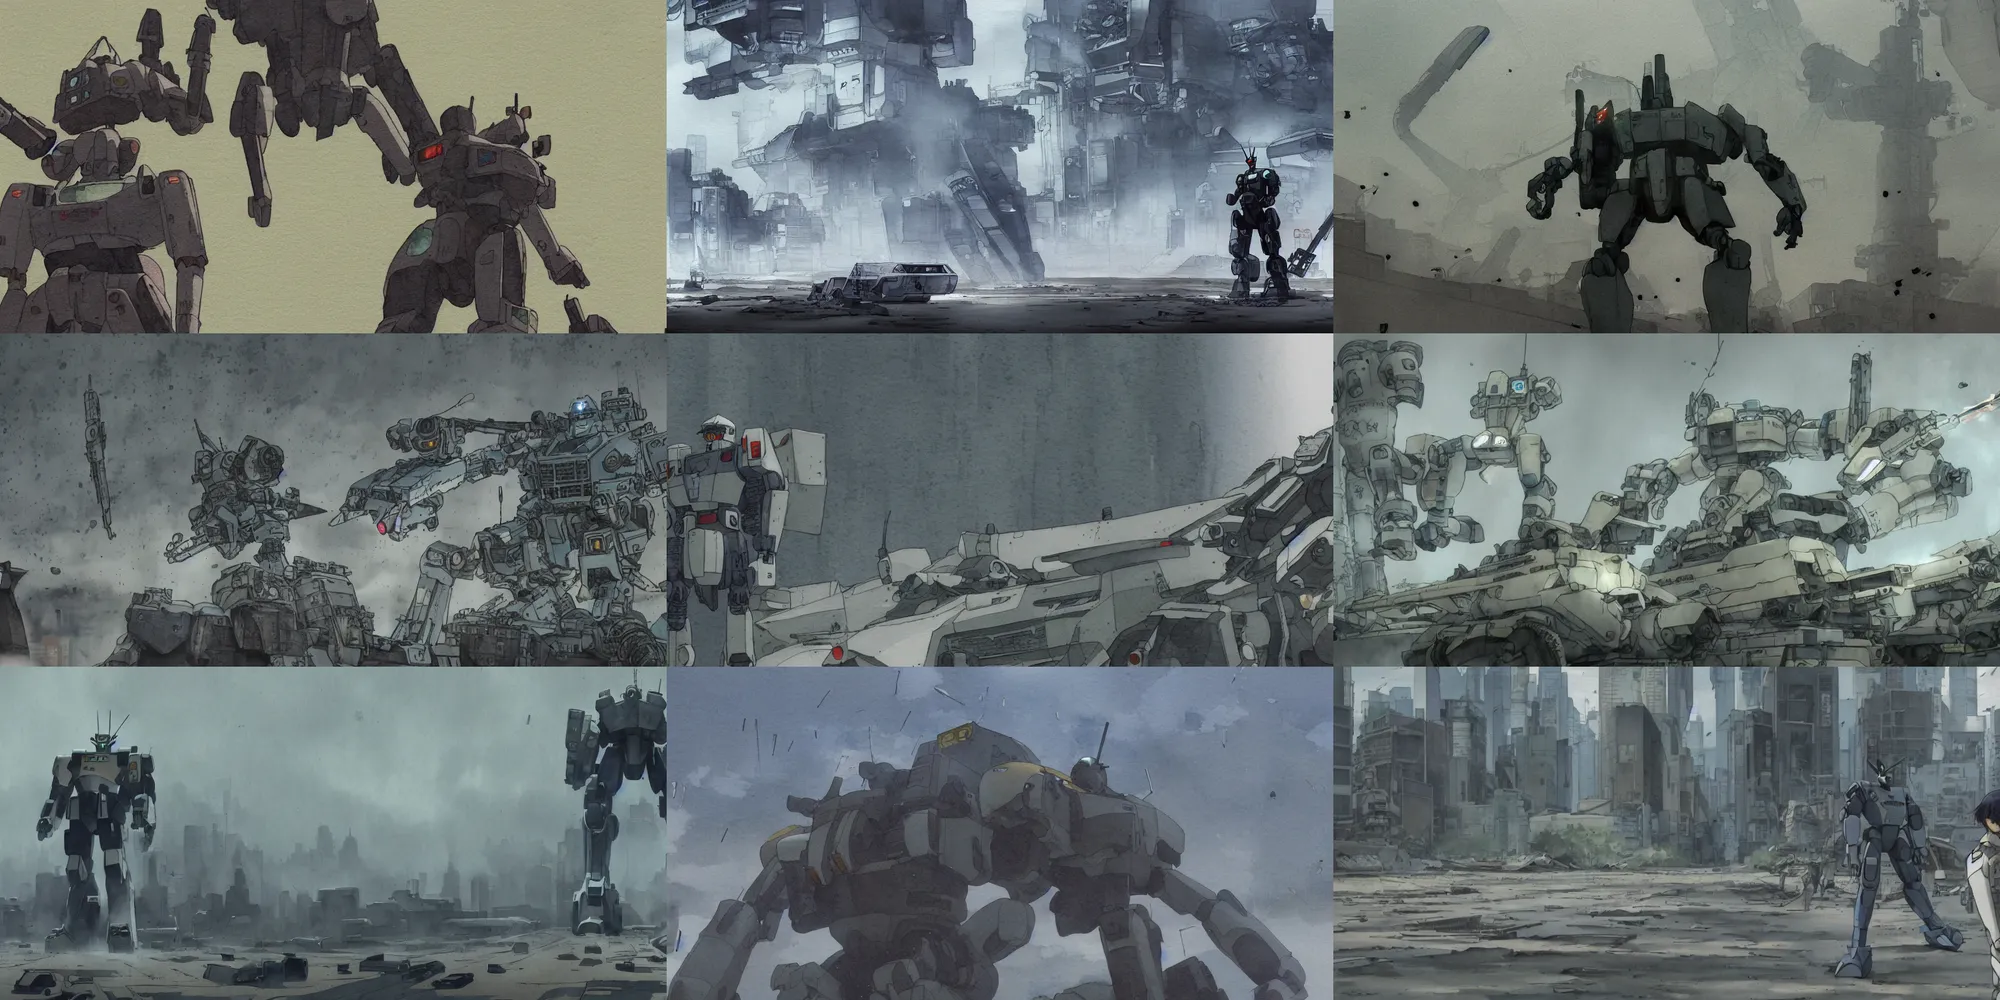 Prompt: incredible screenshot, simple watercolor, patlabor, masamune shirow ghost in the shell movie scene close up broken Kusanagi tank battle, brown mud, dust, titanic tank with legs, robot arm, ripped to shreds, engine parts, karate kick , laser wip, glass shatters, light rain, trees, forest, pipes, sewer, dam, green sky, reflections, refraction, bounce light, ruan jia, rim light, bokeh ,hd, 4k, remaster, dynamic camera angle, deep 3 point perspective, fish eye, dynamic scene